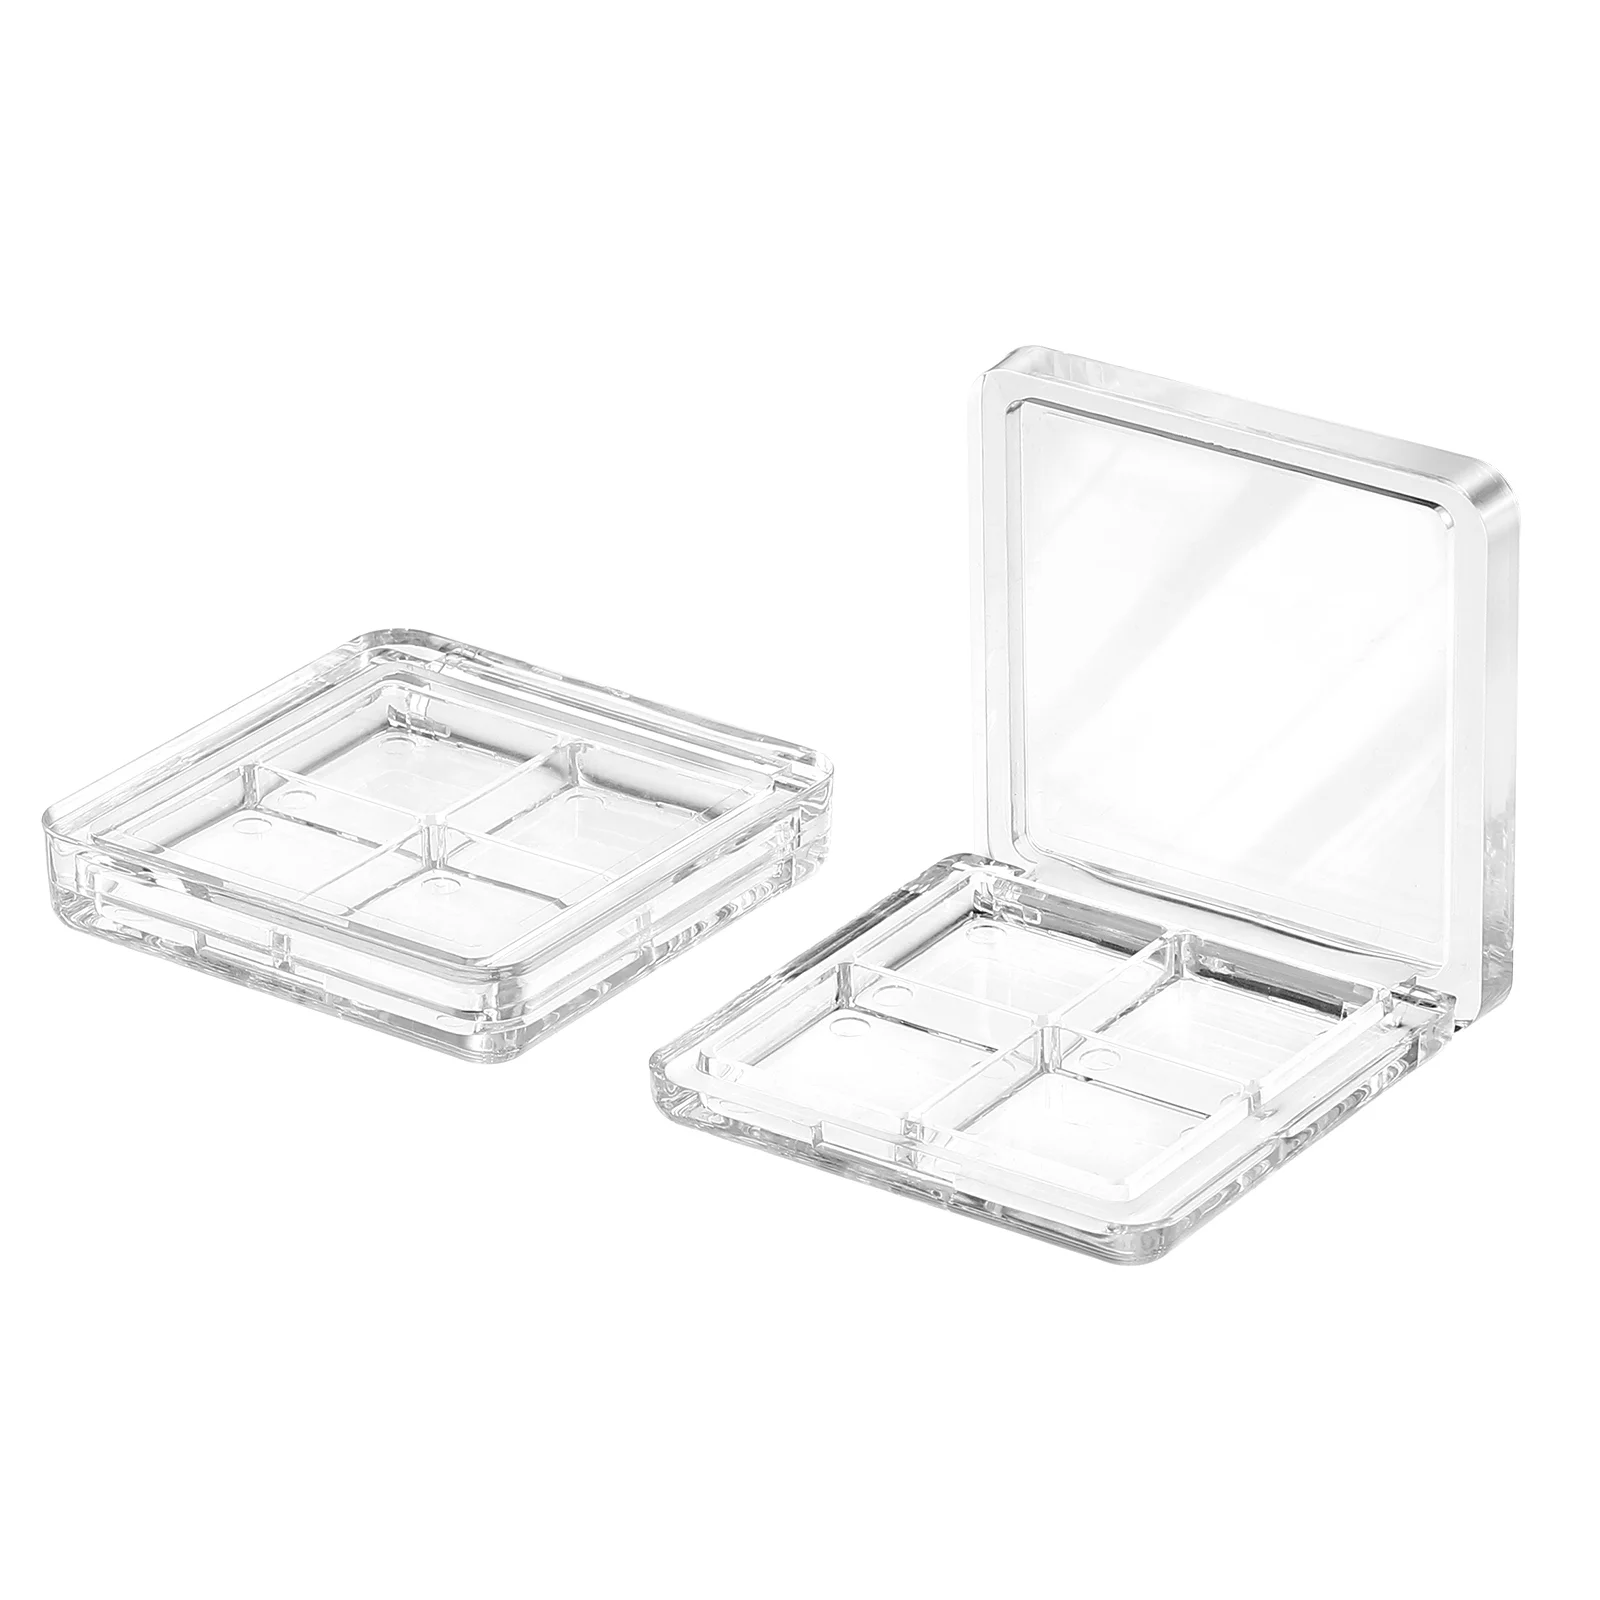 

2PCS Eyeshowder Makeup Container Empty Eyeshadow Case Empty Highlighter Container Diy Eyeshadow Pallet Clear Eyeshadow Pallet